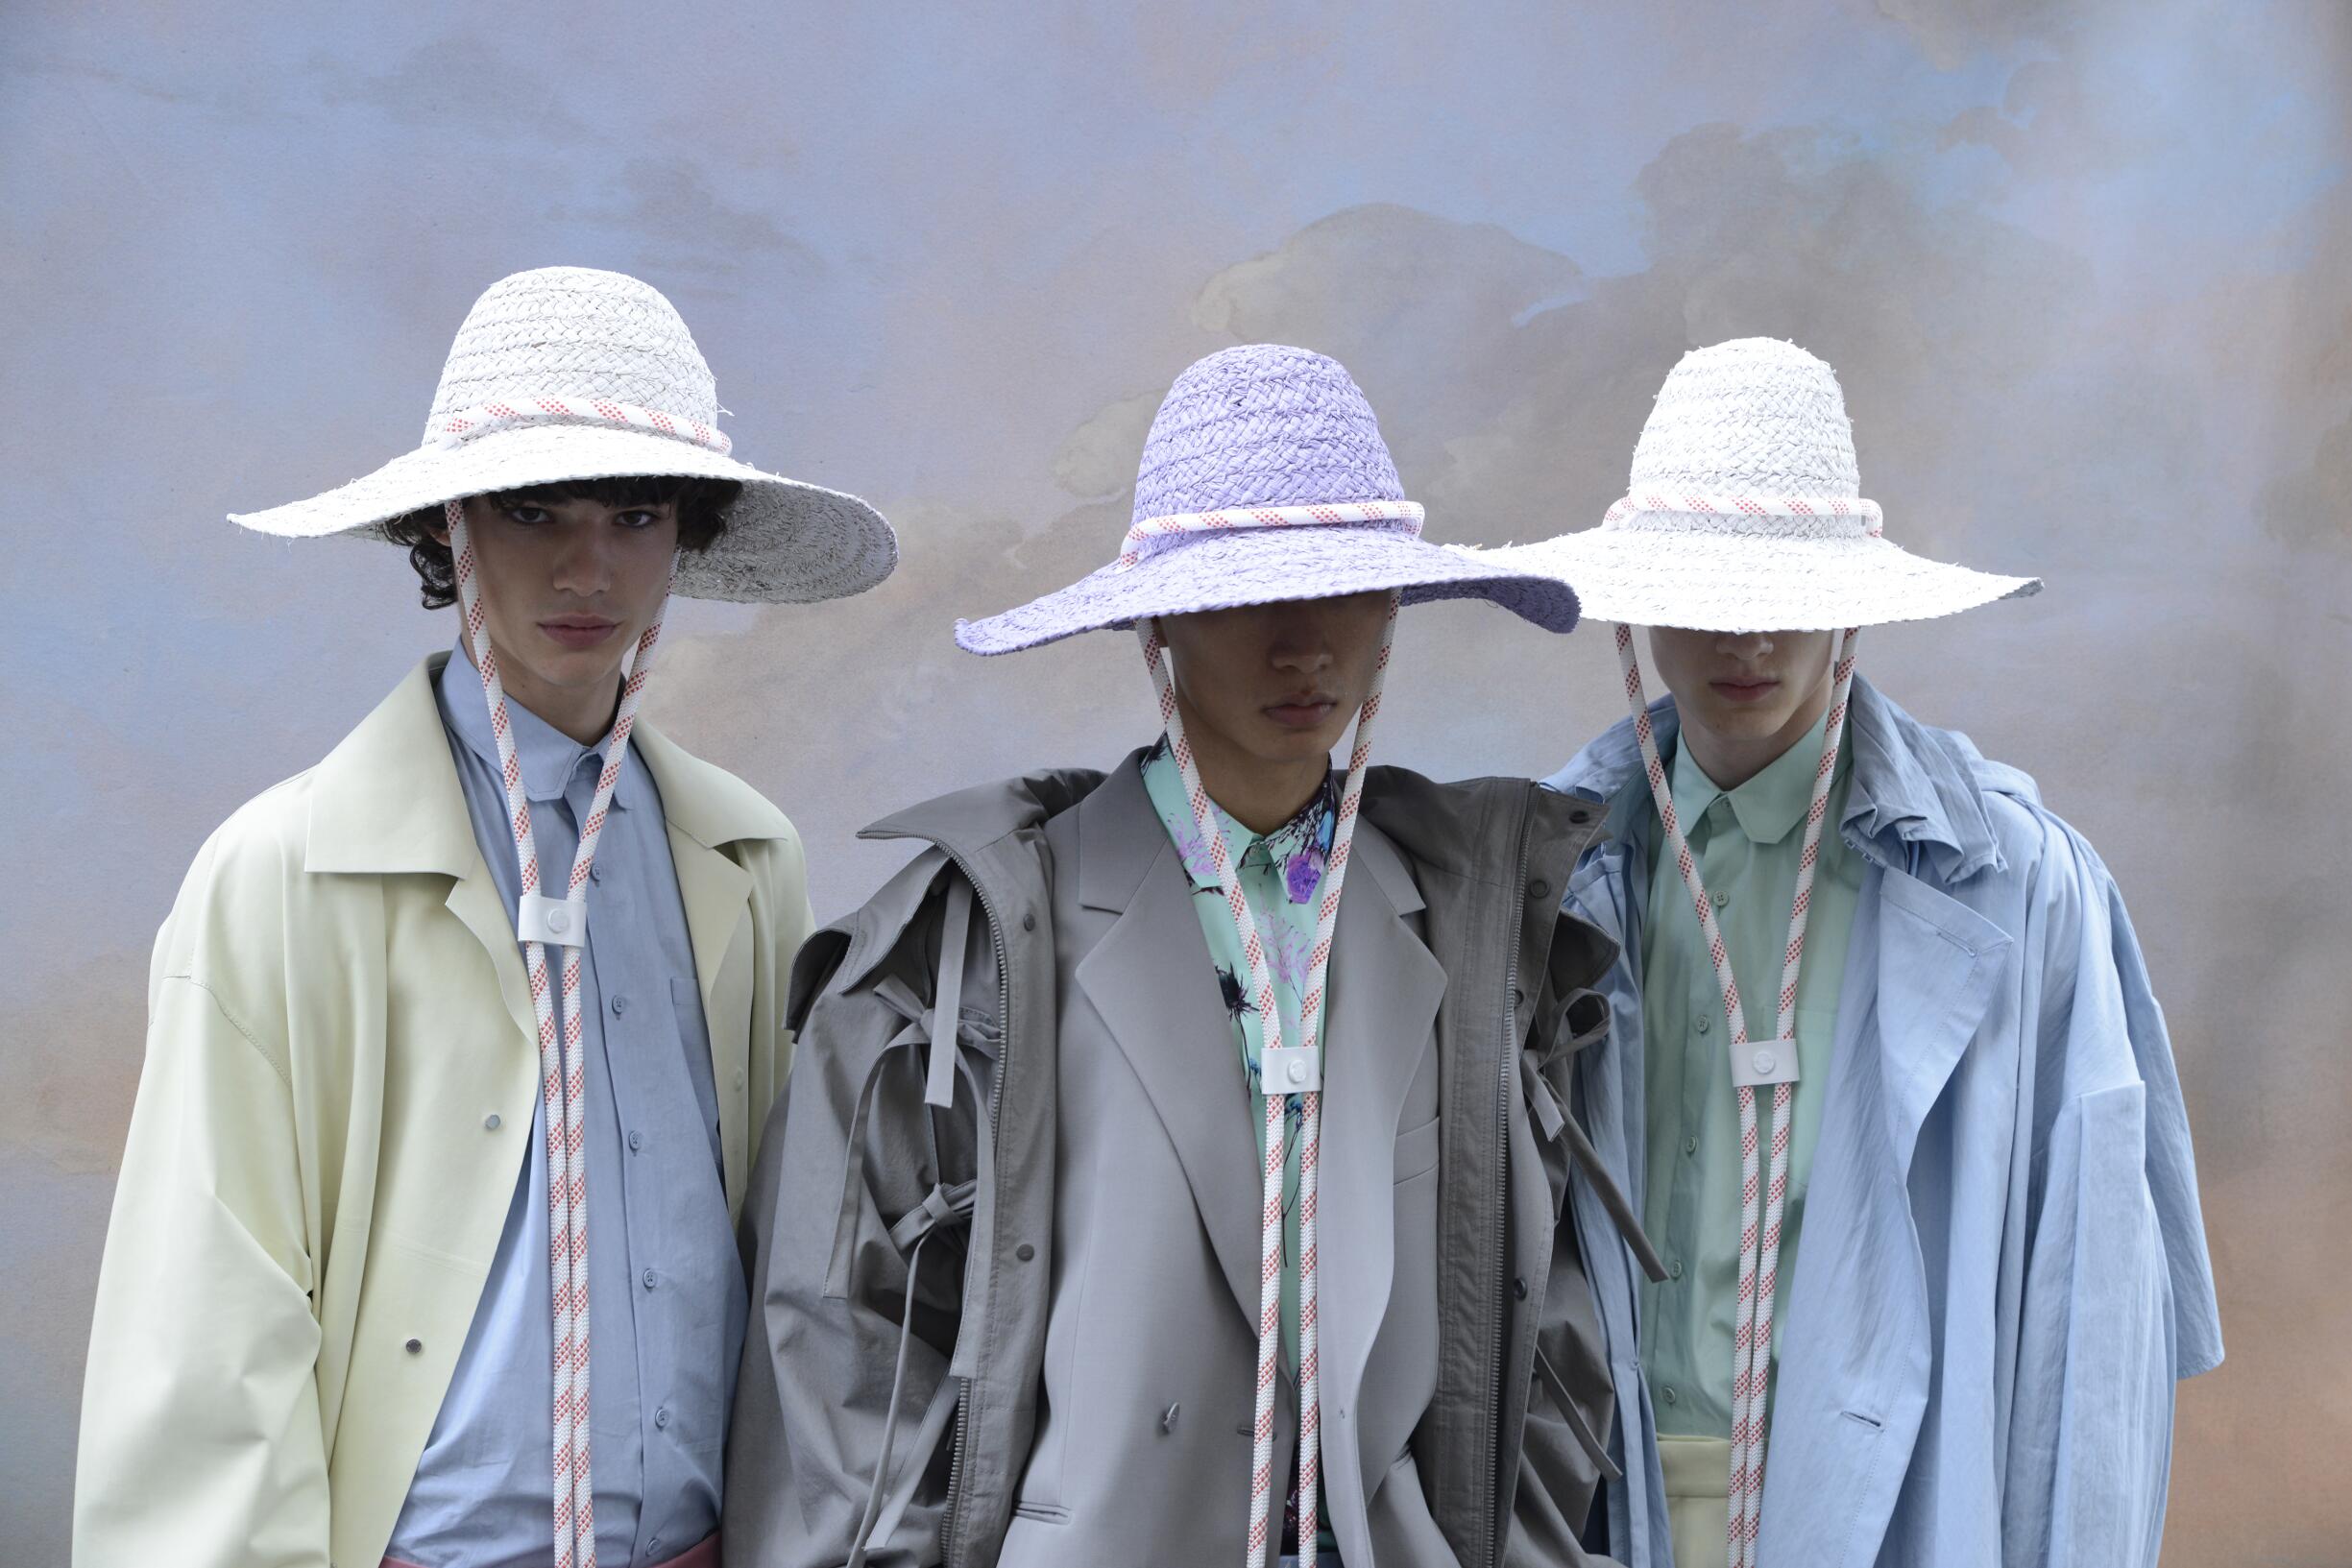 BACKSTAGE LOUIS VUITTON SS 2020 MEN’S COLLECTION | The Skinny Beep